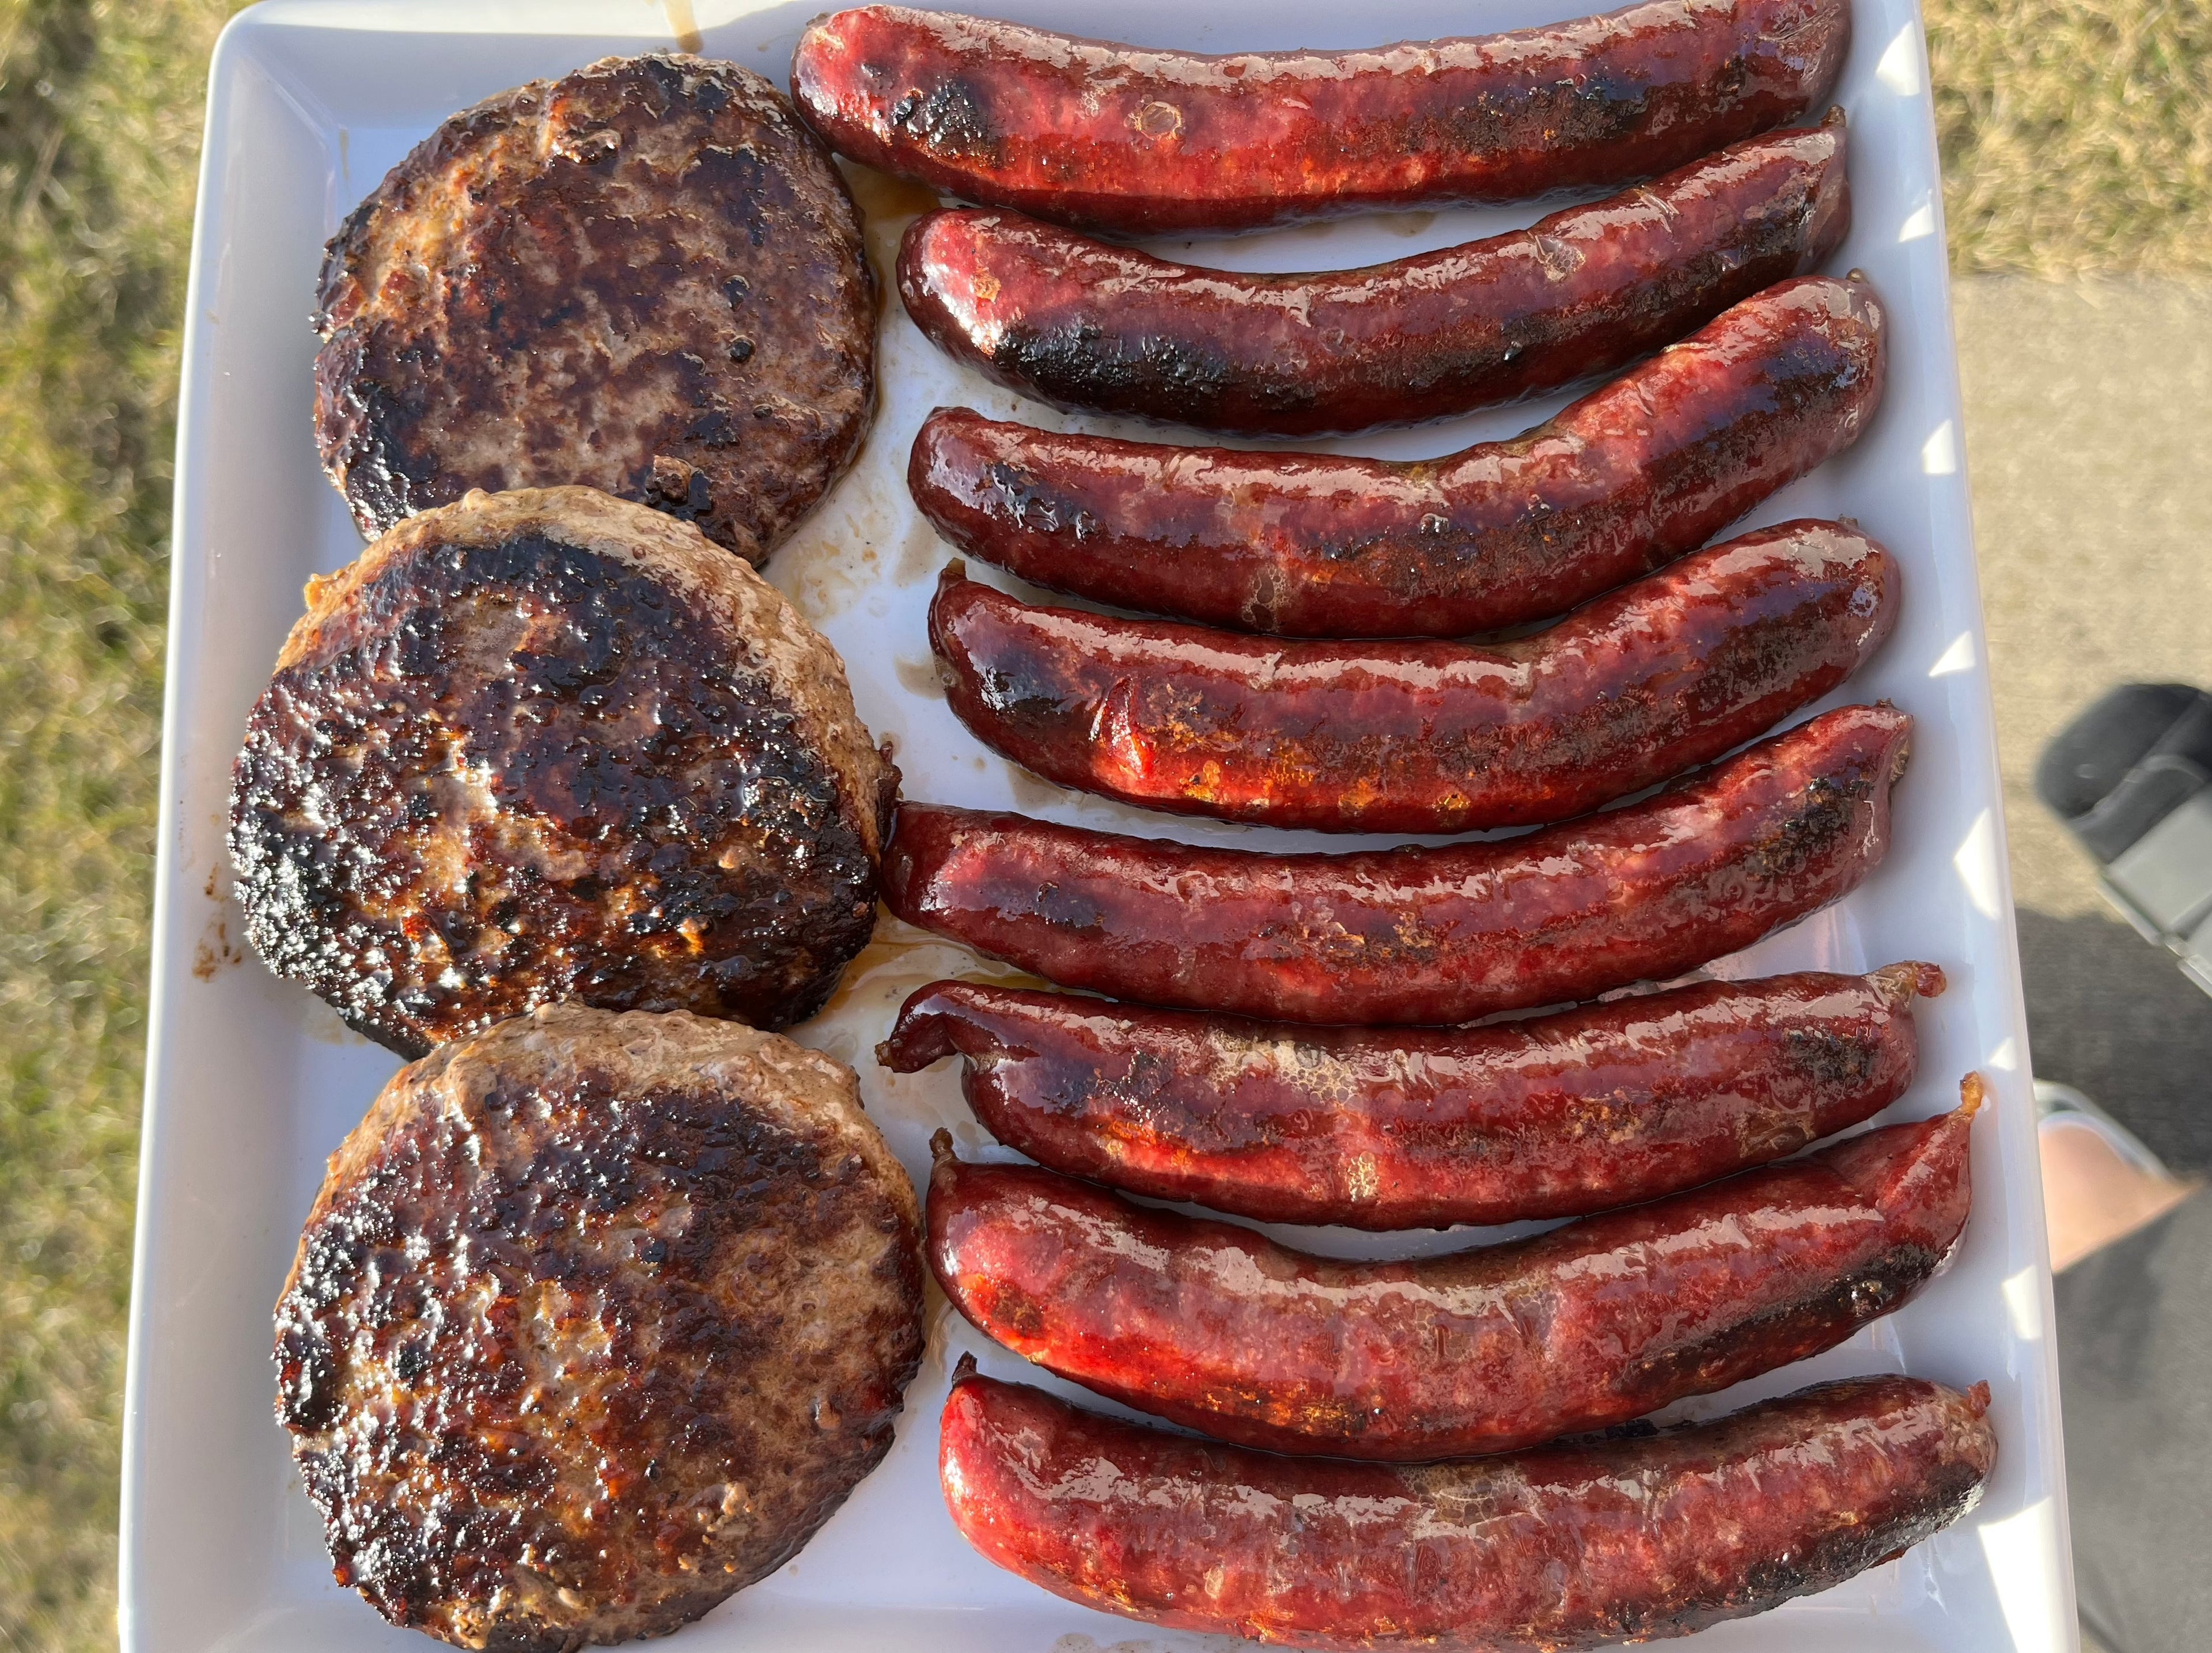 American Wagyu burgers and American Wagyu hot dogs on a plate.